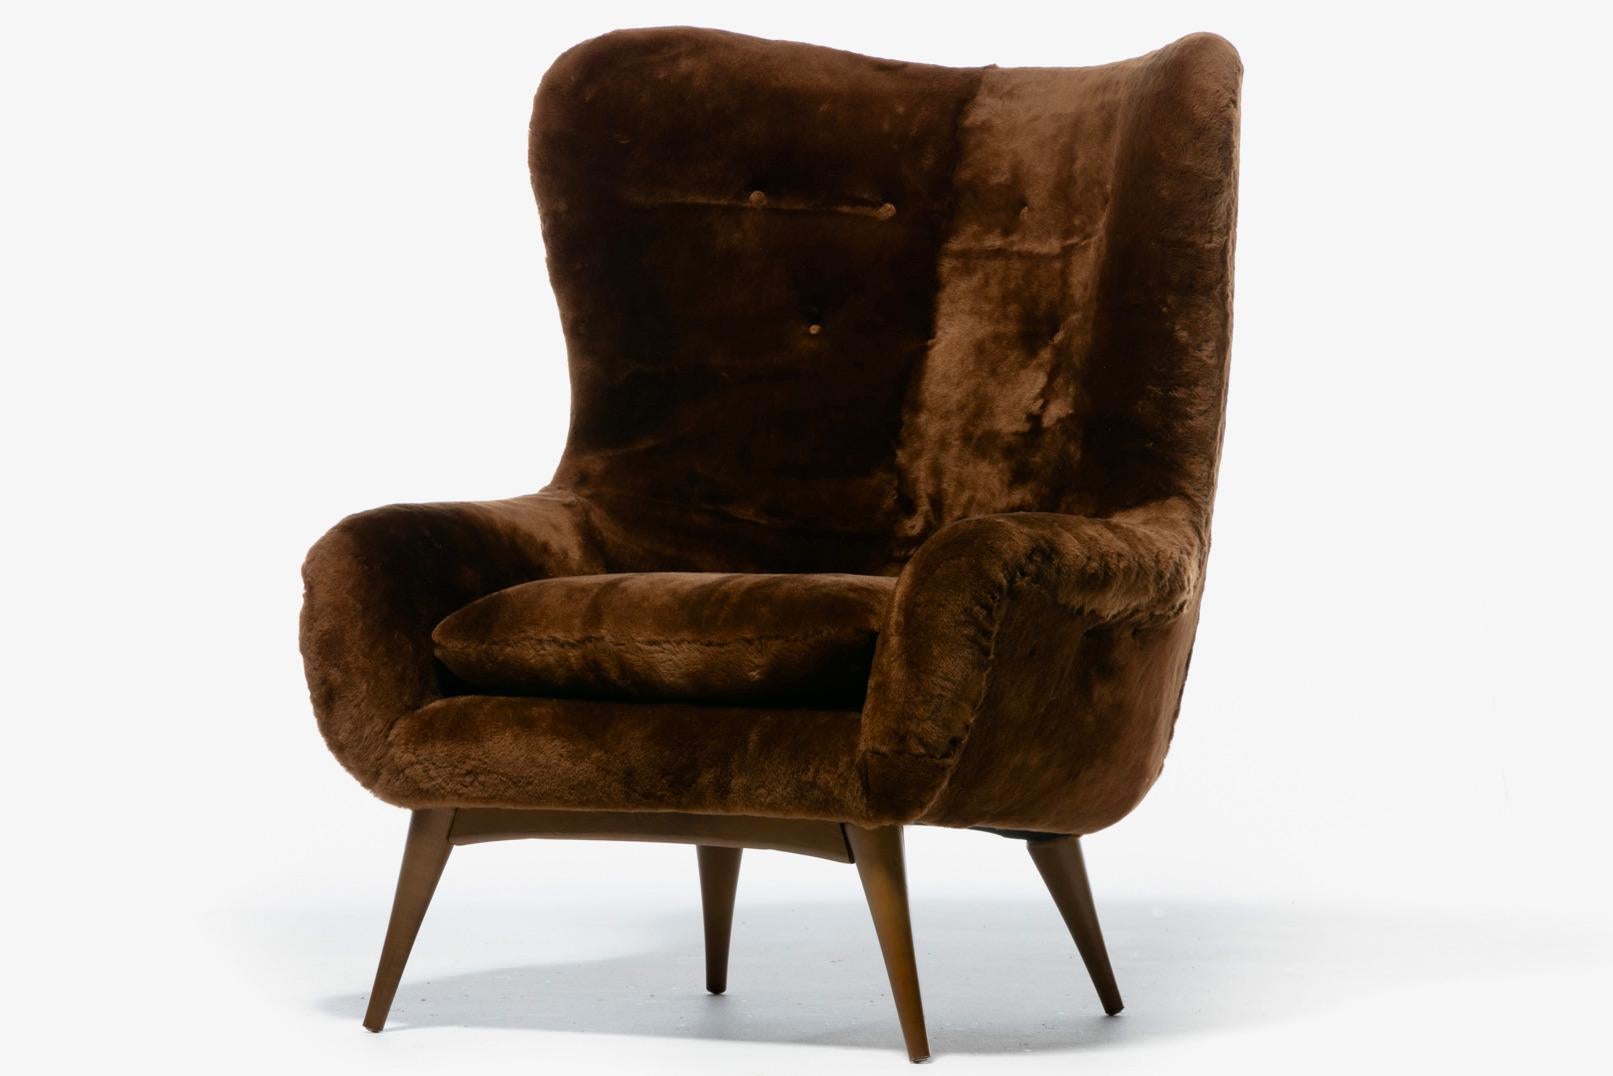 Mid-20th Century Karpen Wingback Chairs in Luxuriously Soft Milk Chocolate Shearling, circa 1950s For Sale